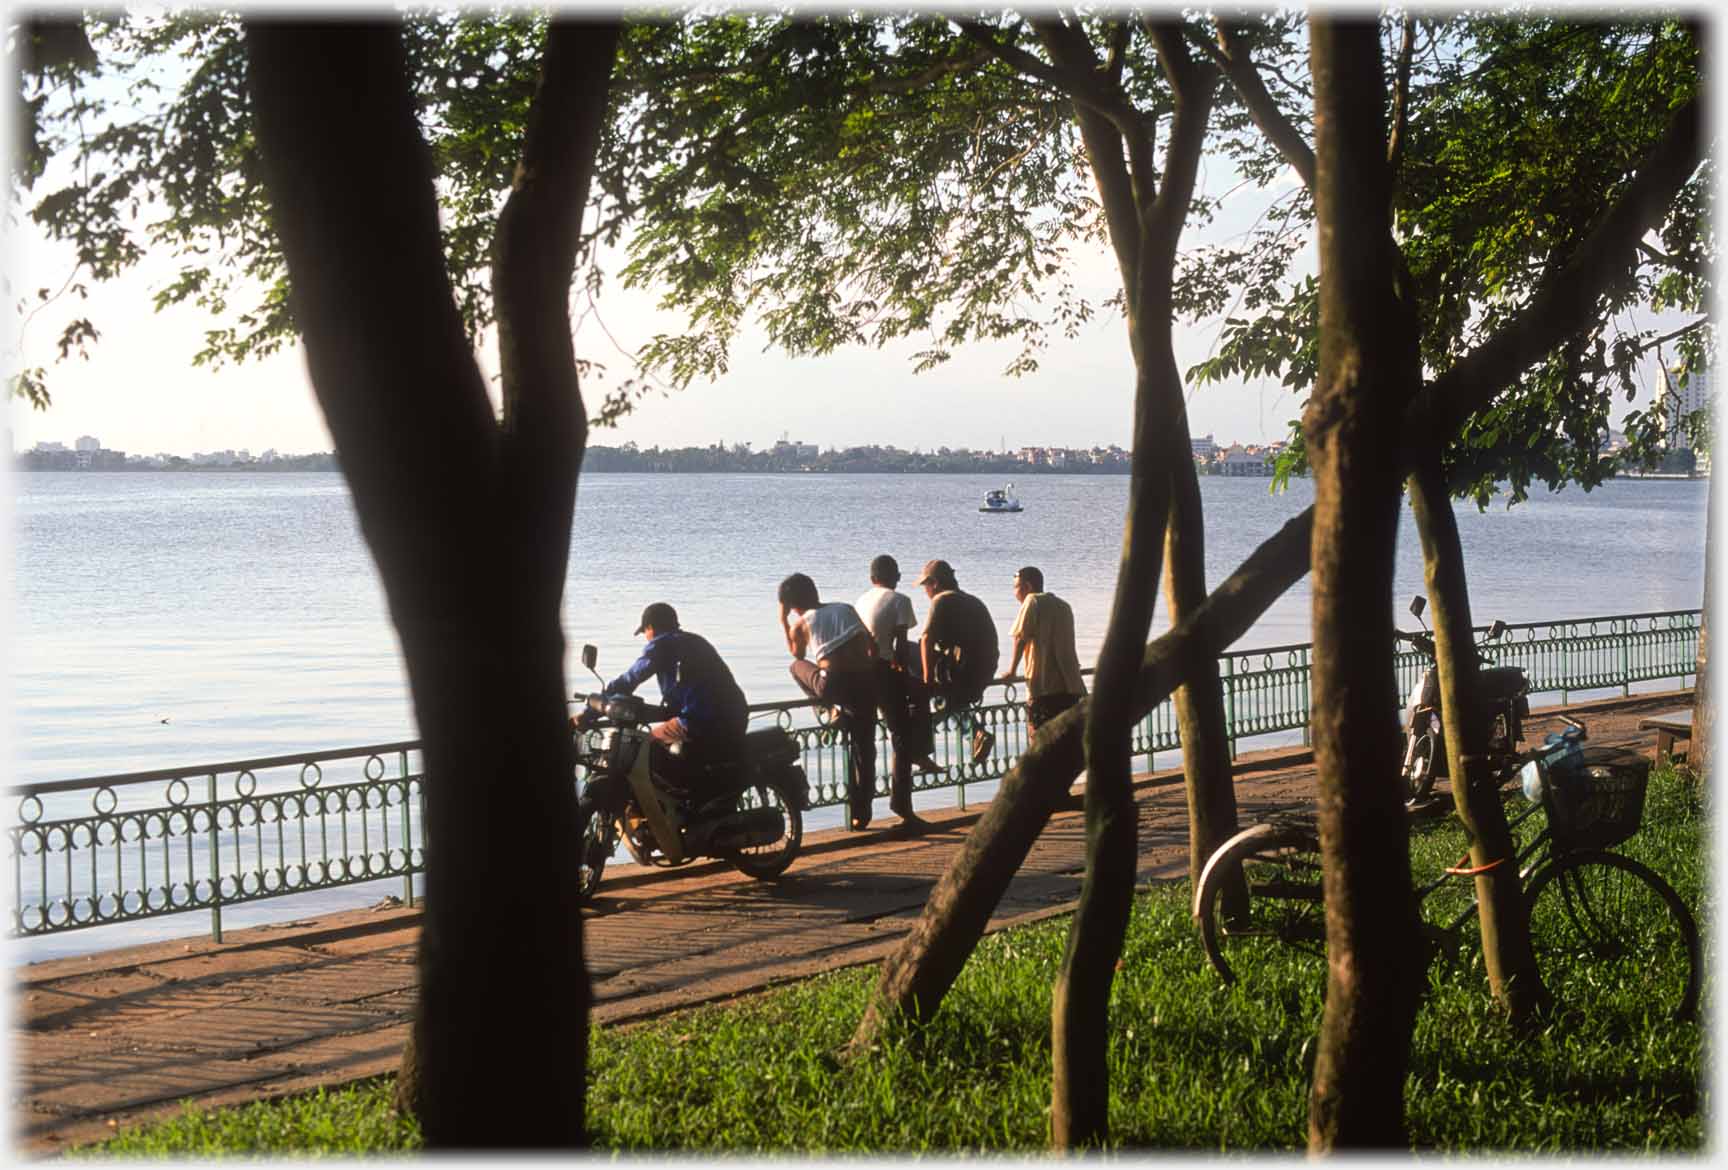 Group of men seen through trees by the lake.